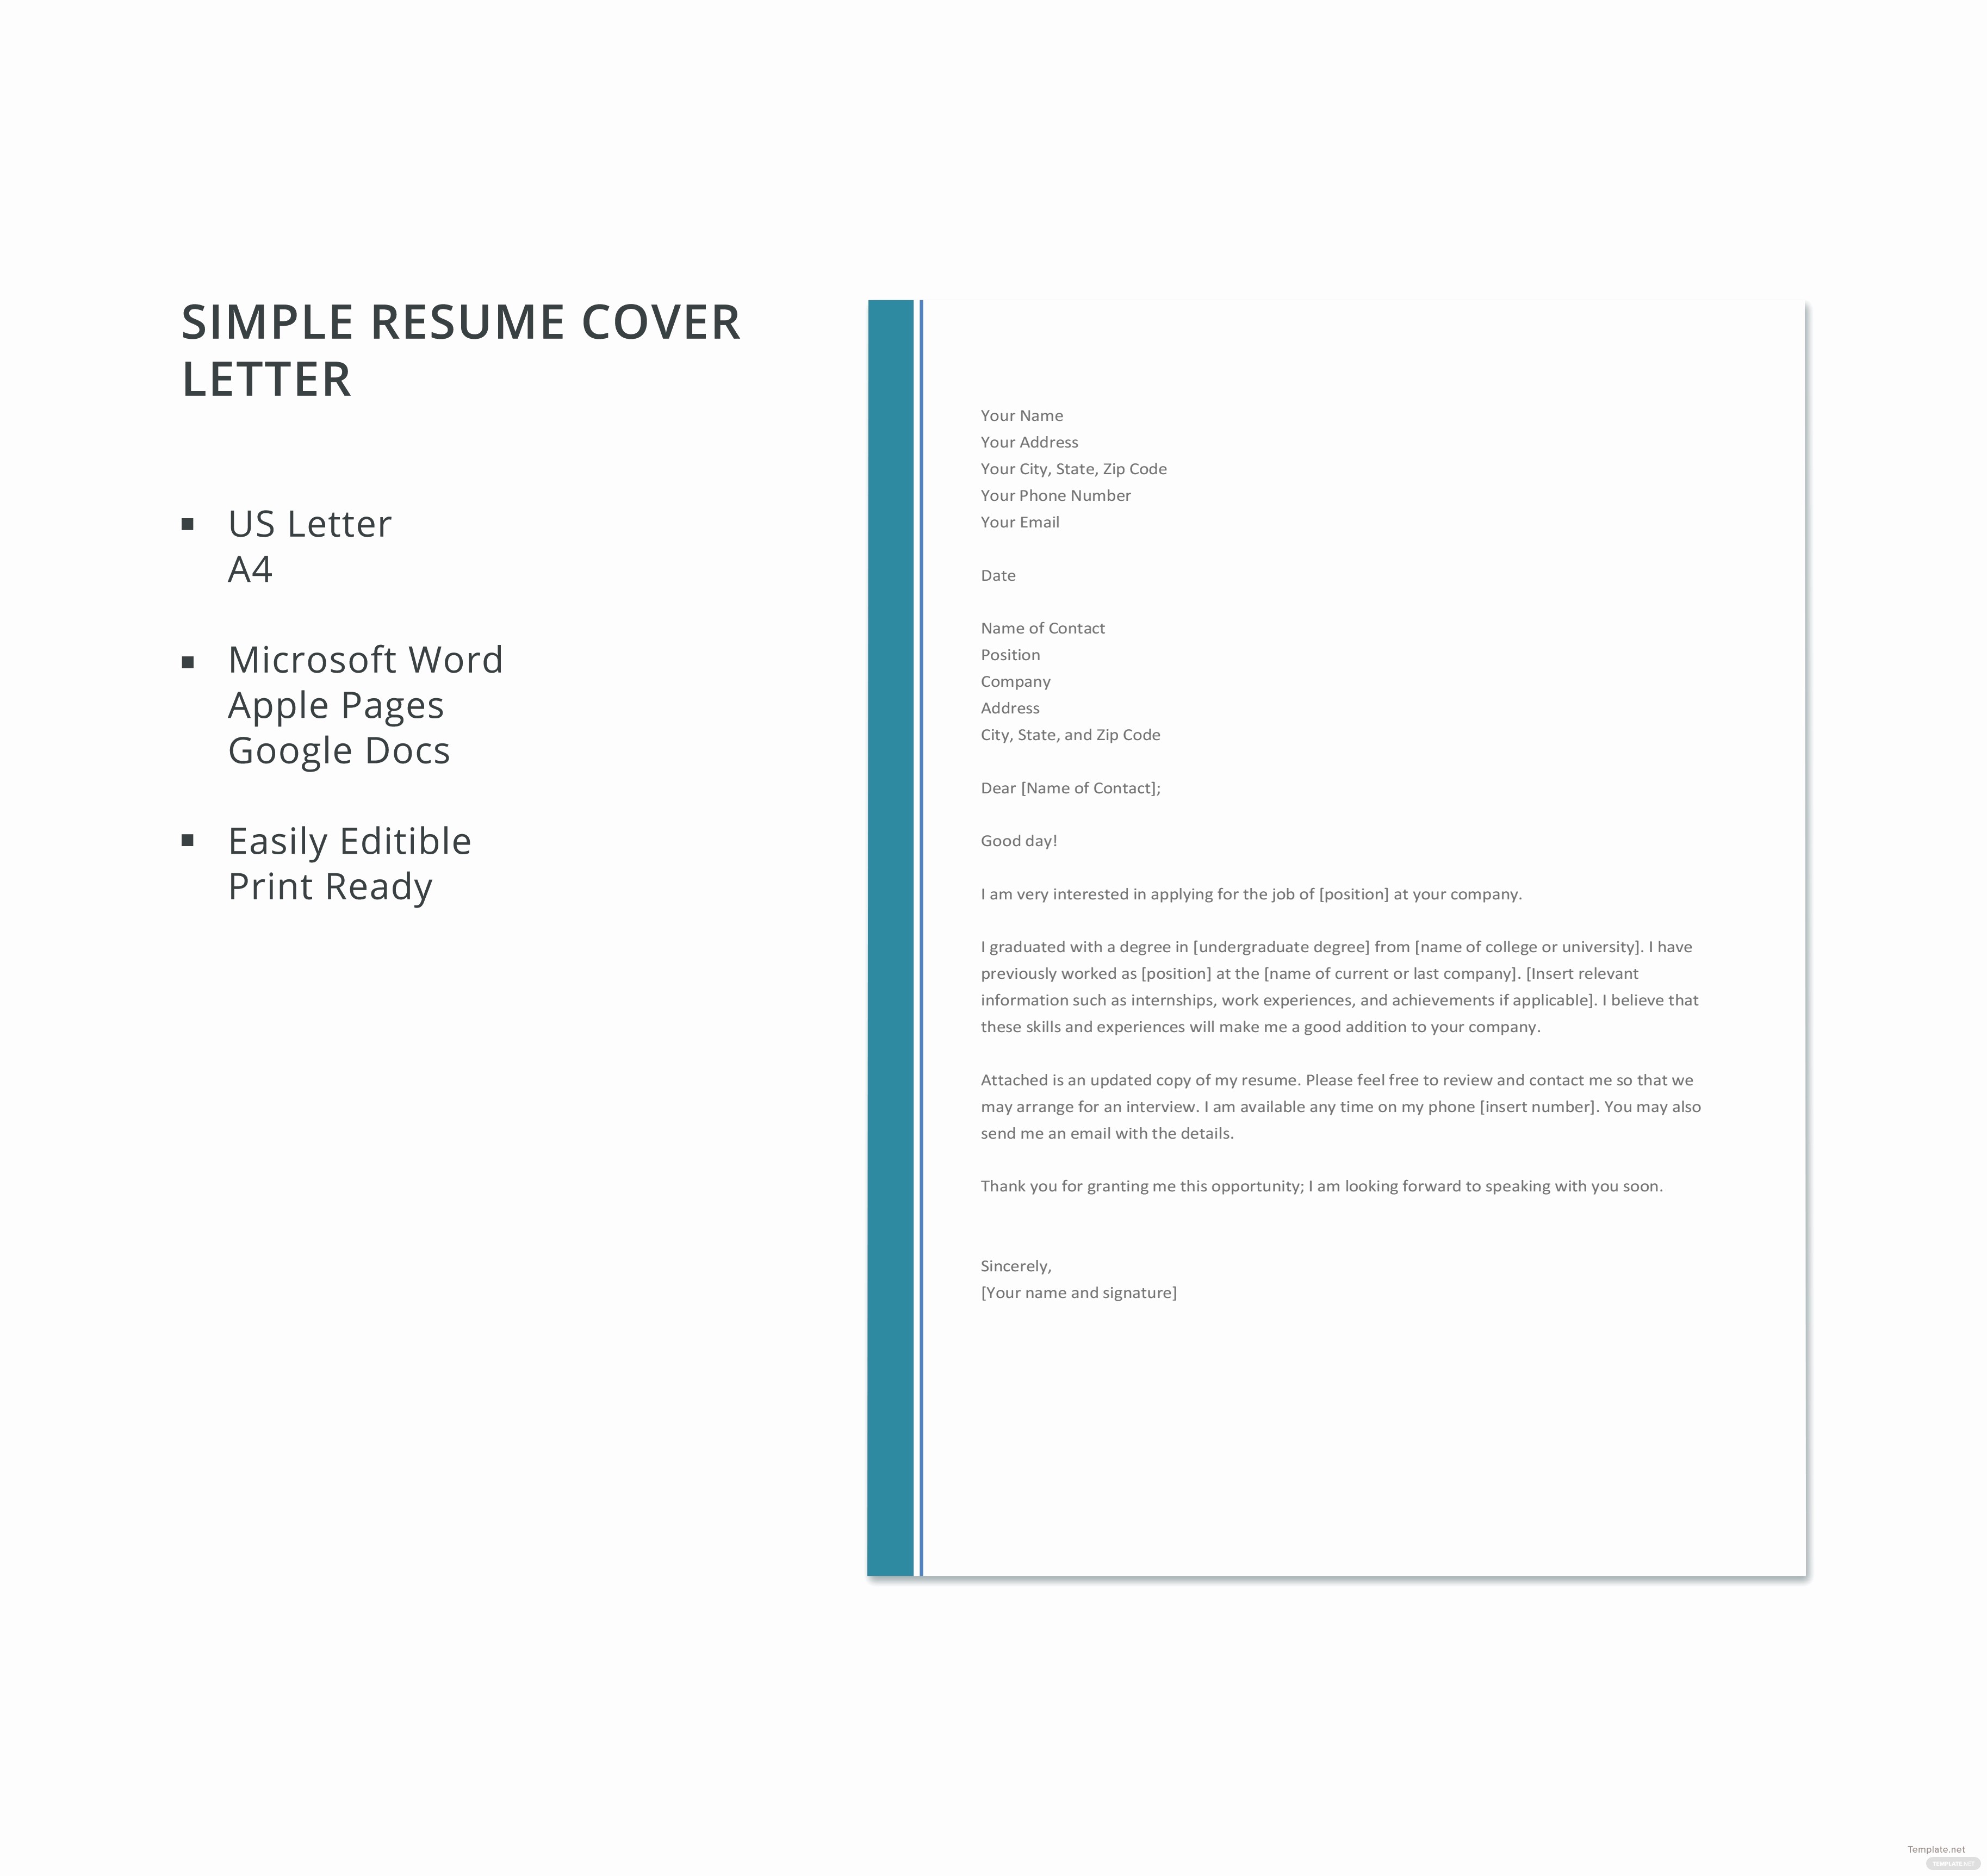 Simple Resume Cover Letter Samples Unique Free Simple Resume Cover Letter Template In Microsoft Word